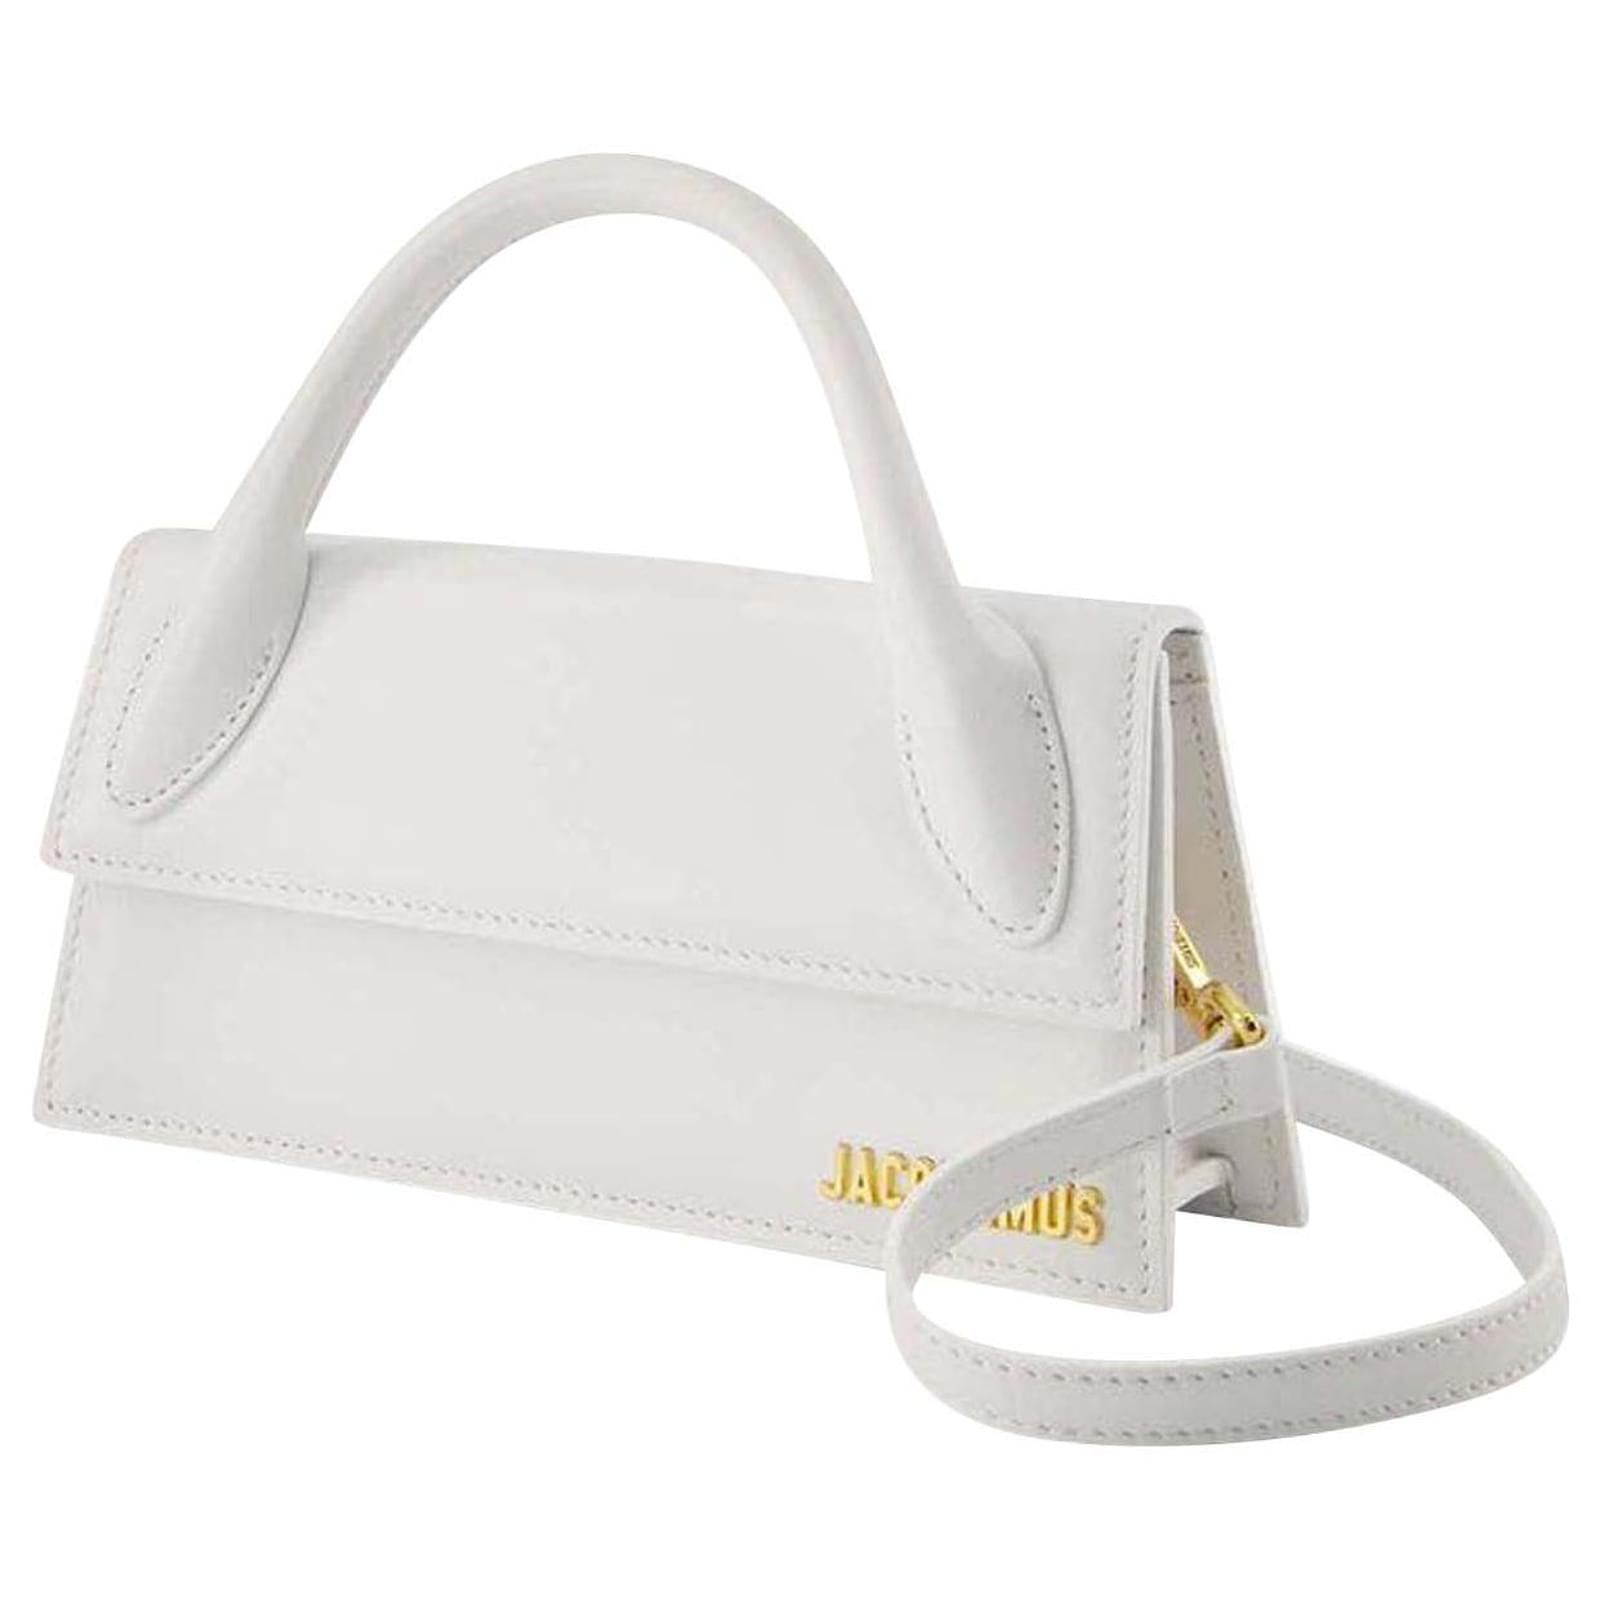 Le Chiquito Long Bag - Jacquemus - White - Leather ref.744149